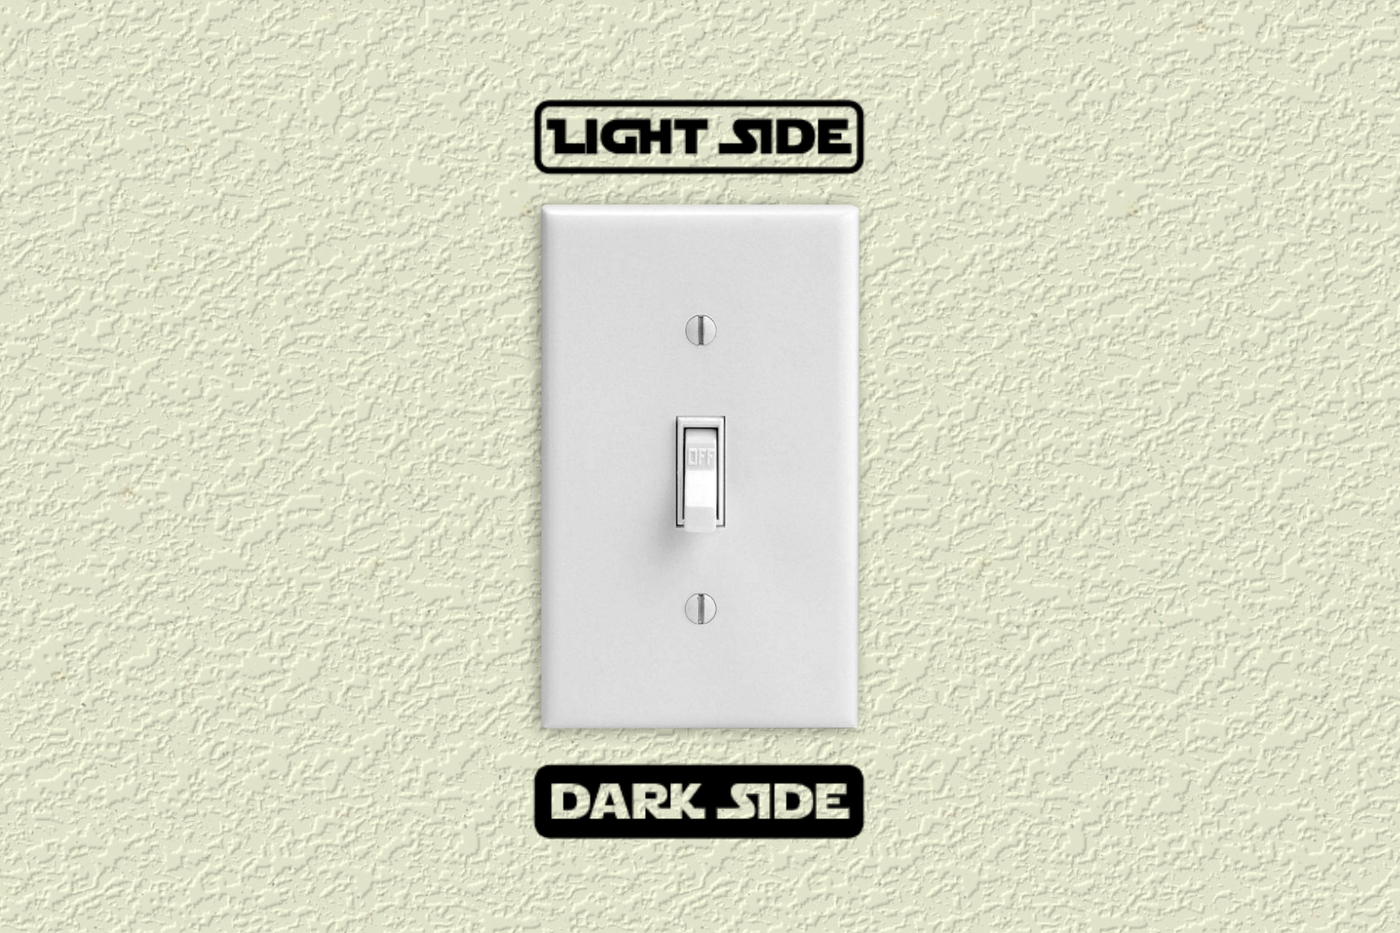 Light switch that is marked "Light side" at the top and "Dark side" at the bottom.